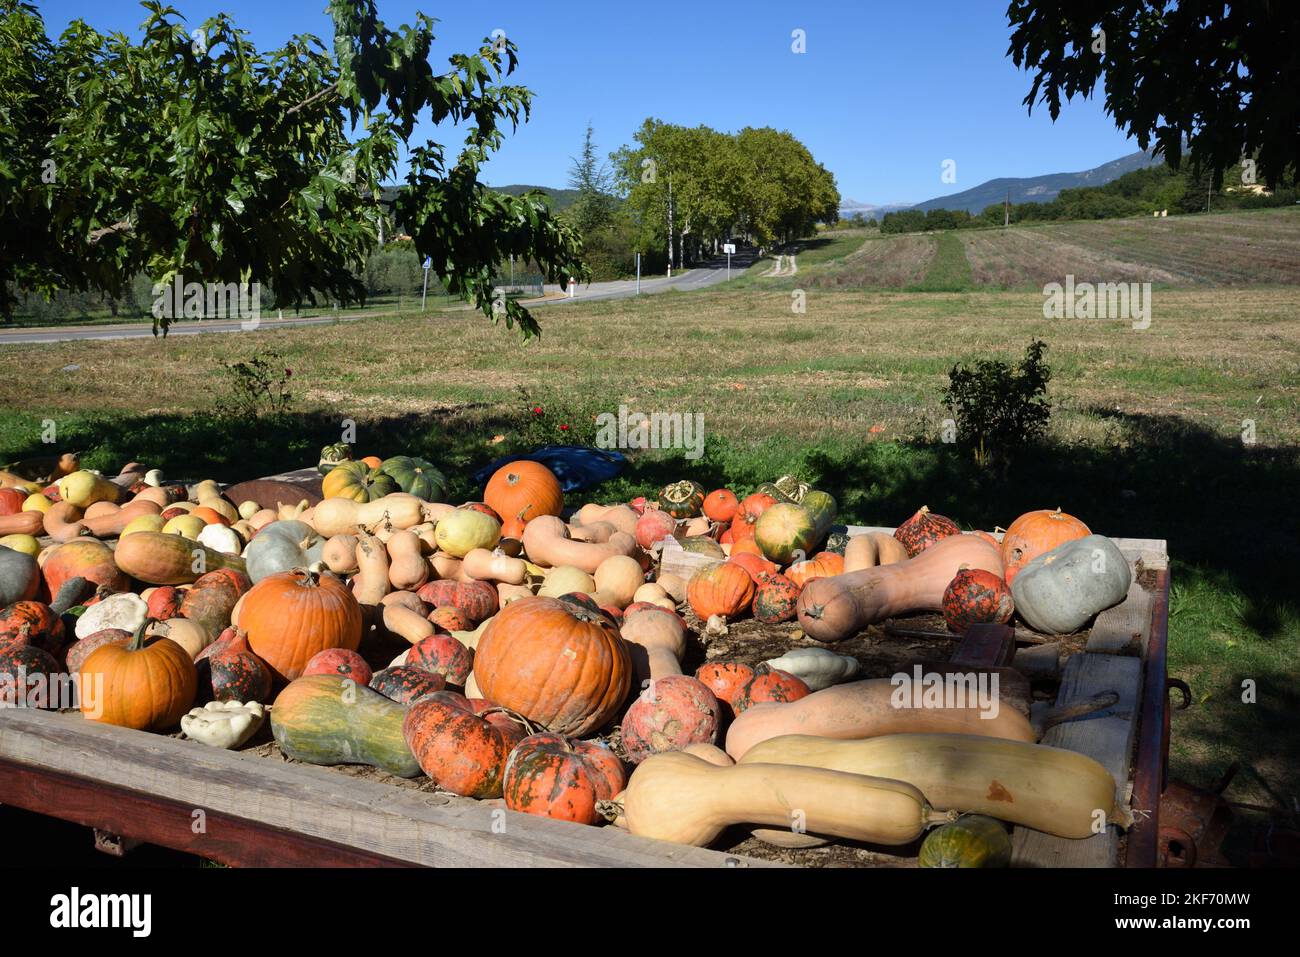 Display of Pumpkins, Squash and Gourds including Butternut Squash and Musquée de Provence for Sale on Roadside Provence France Stock Photo